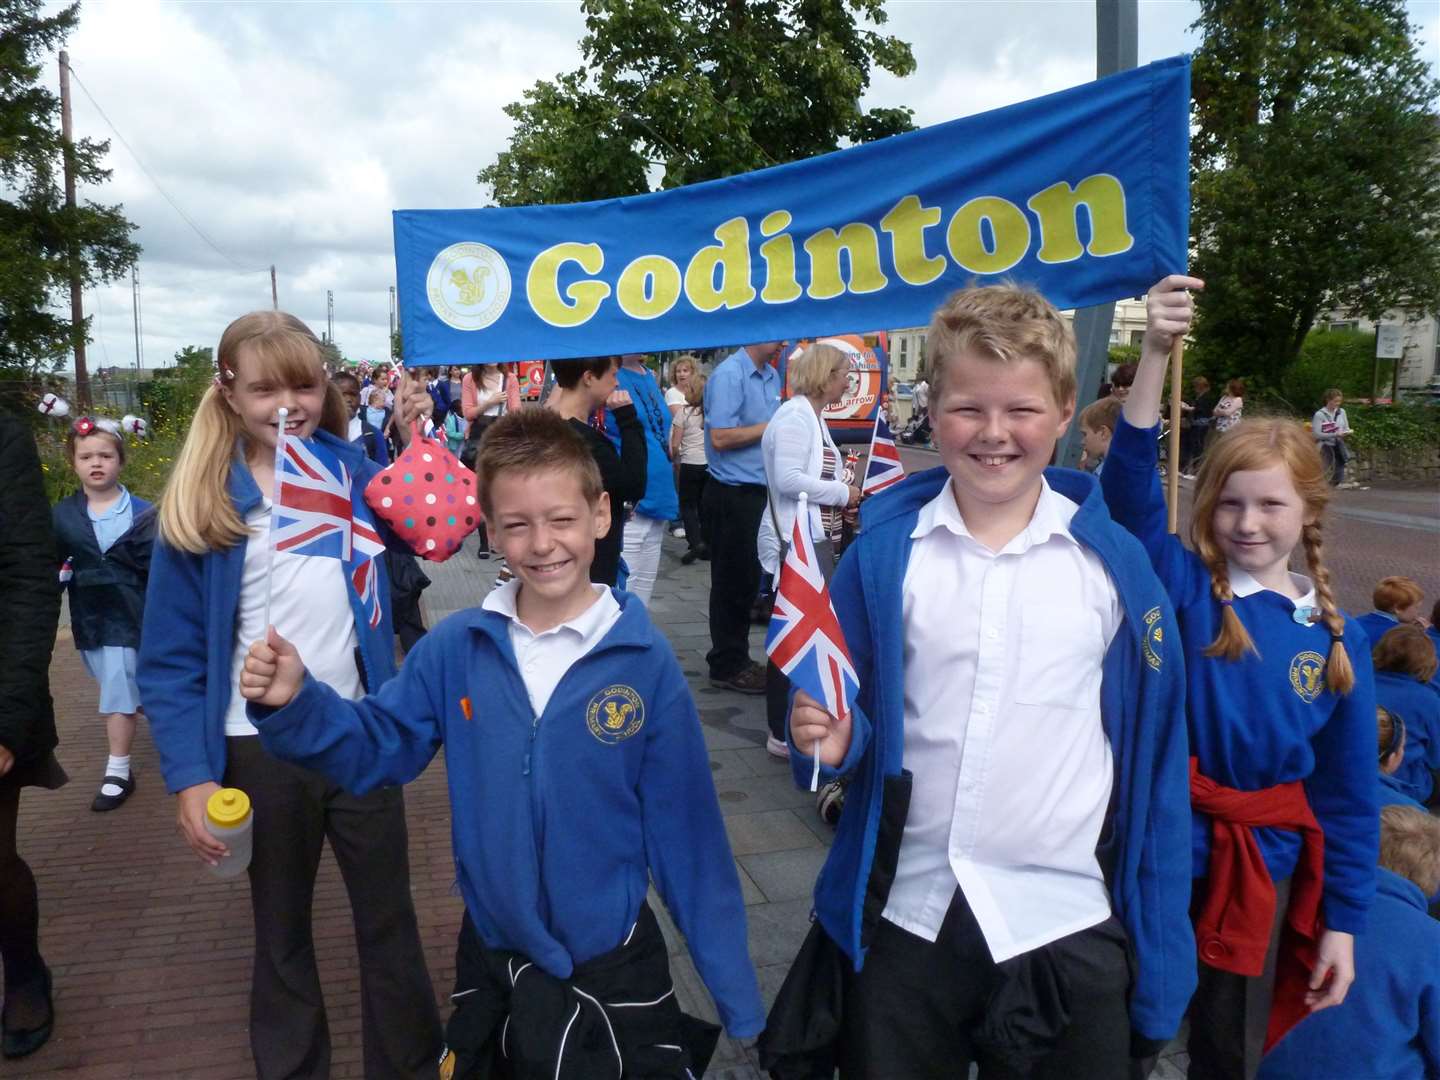 Children from Godinton Park Primary School waiting for the torch in Elwick Road, Ashford